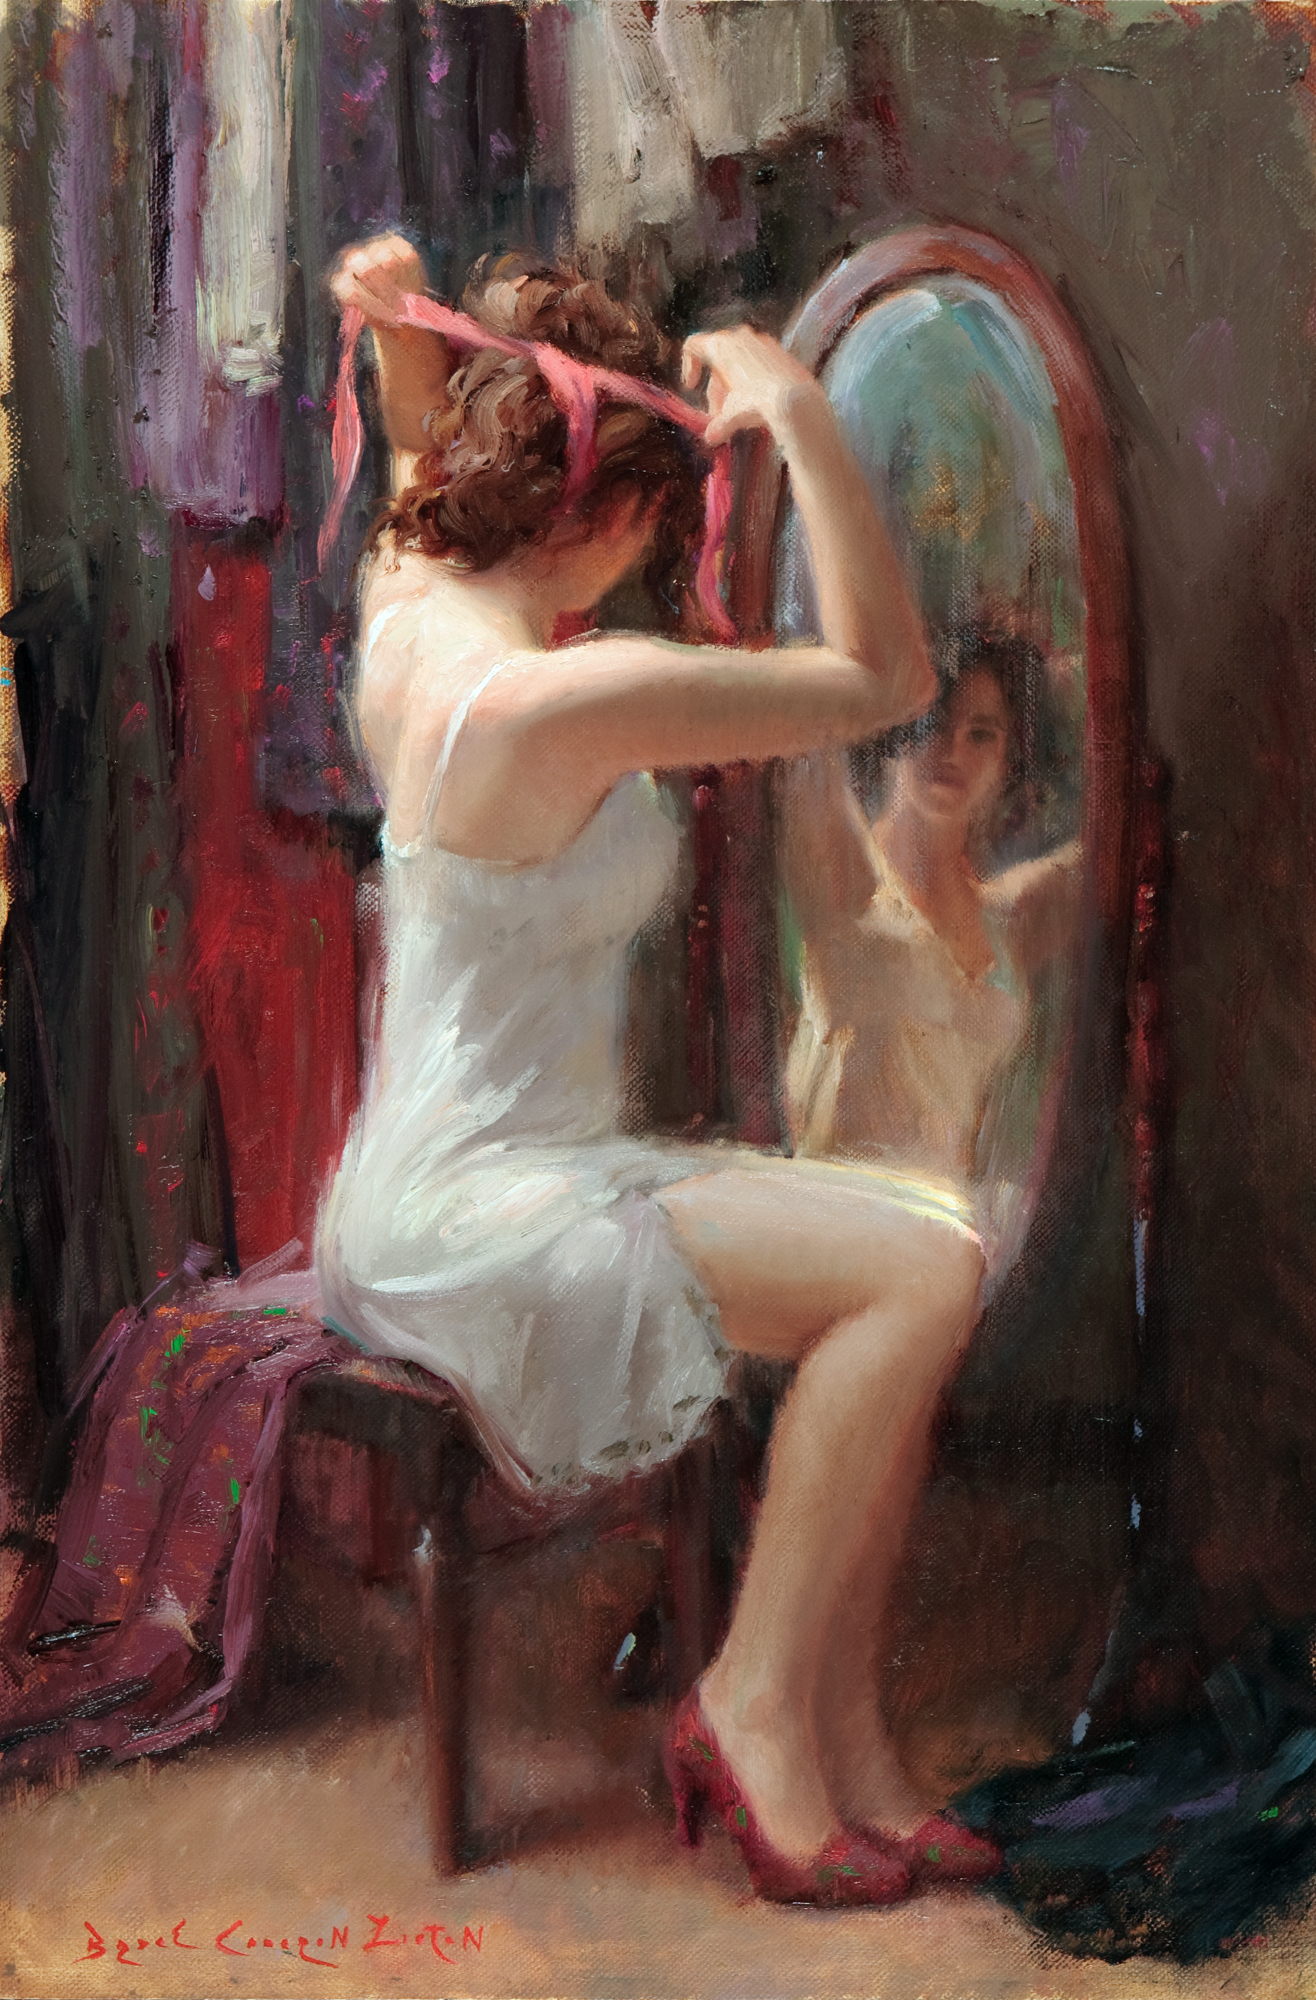 Inspiration for artists - Bryce Cameron Liston, "And Everything Nice," 24 x 16 inches, Oil on linen